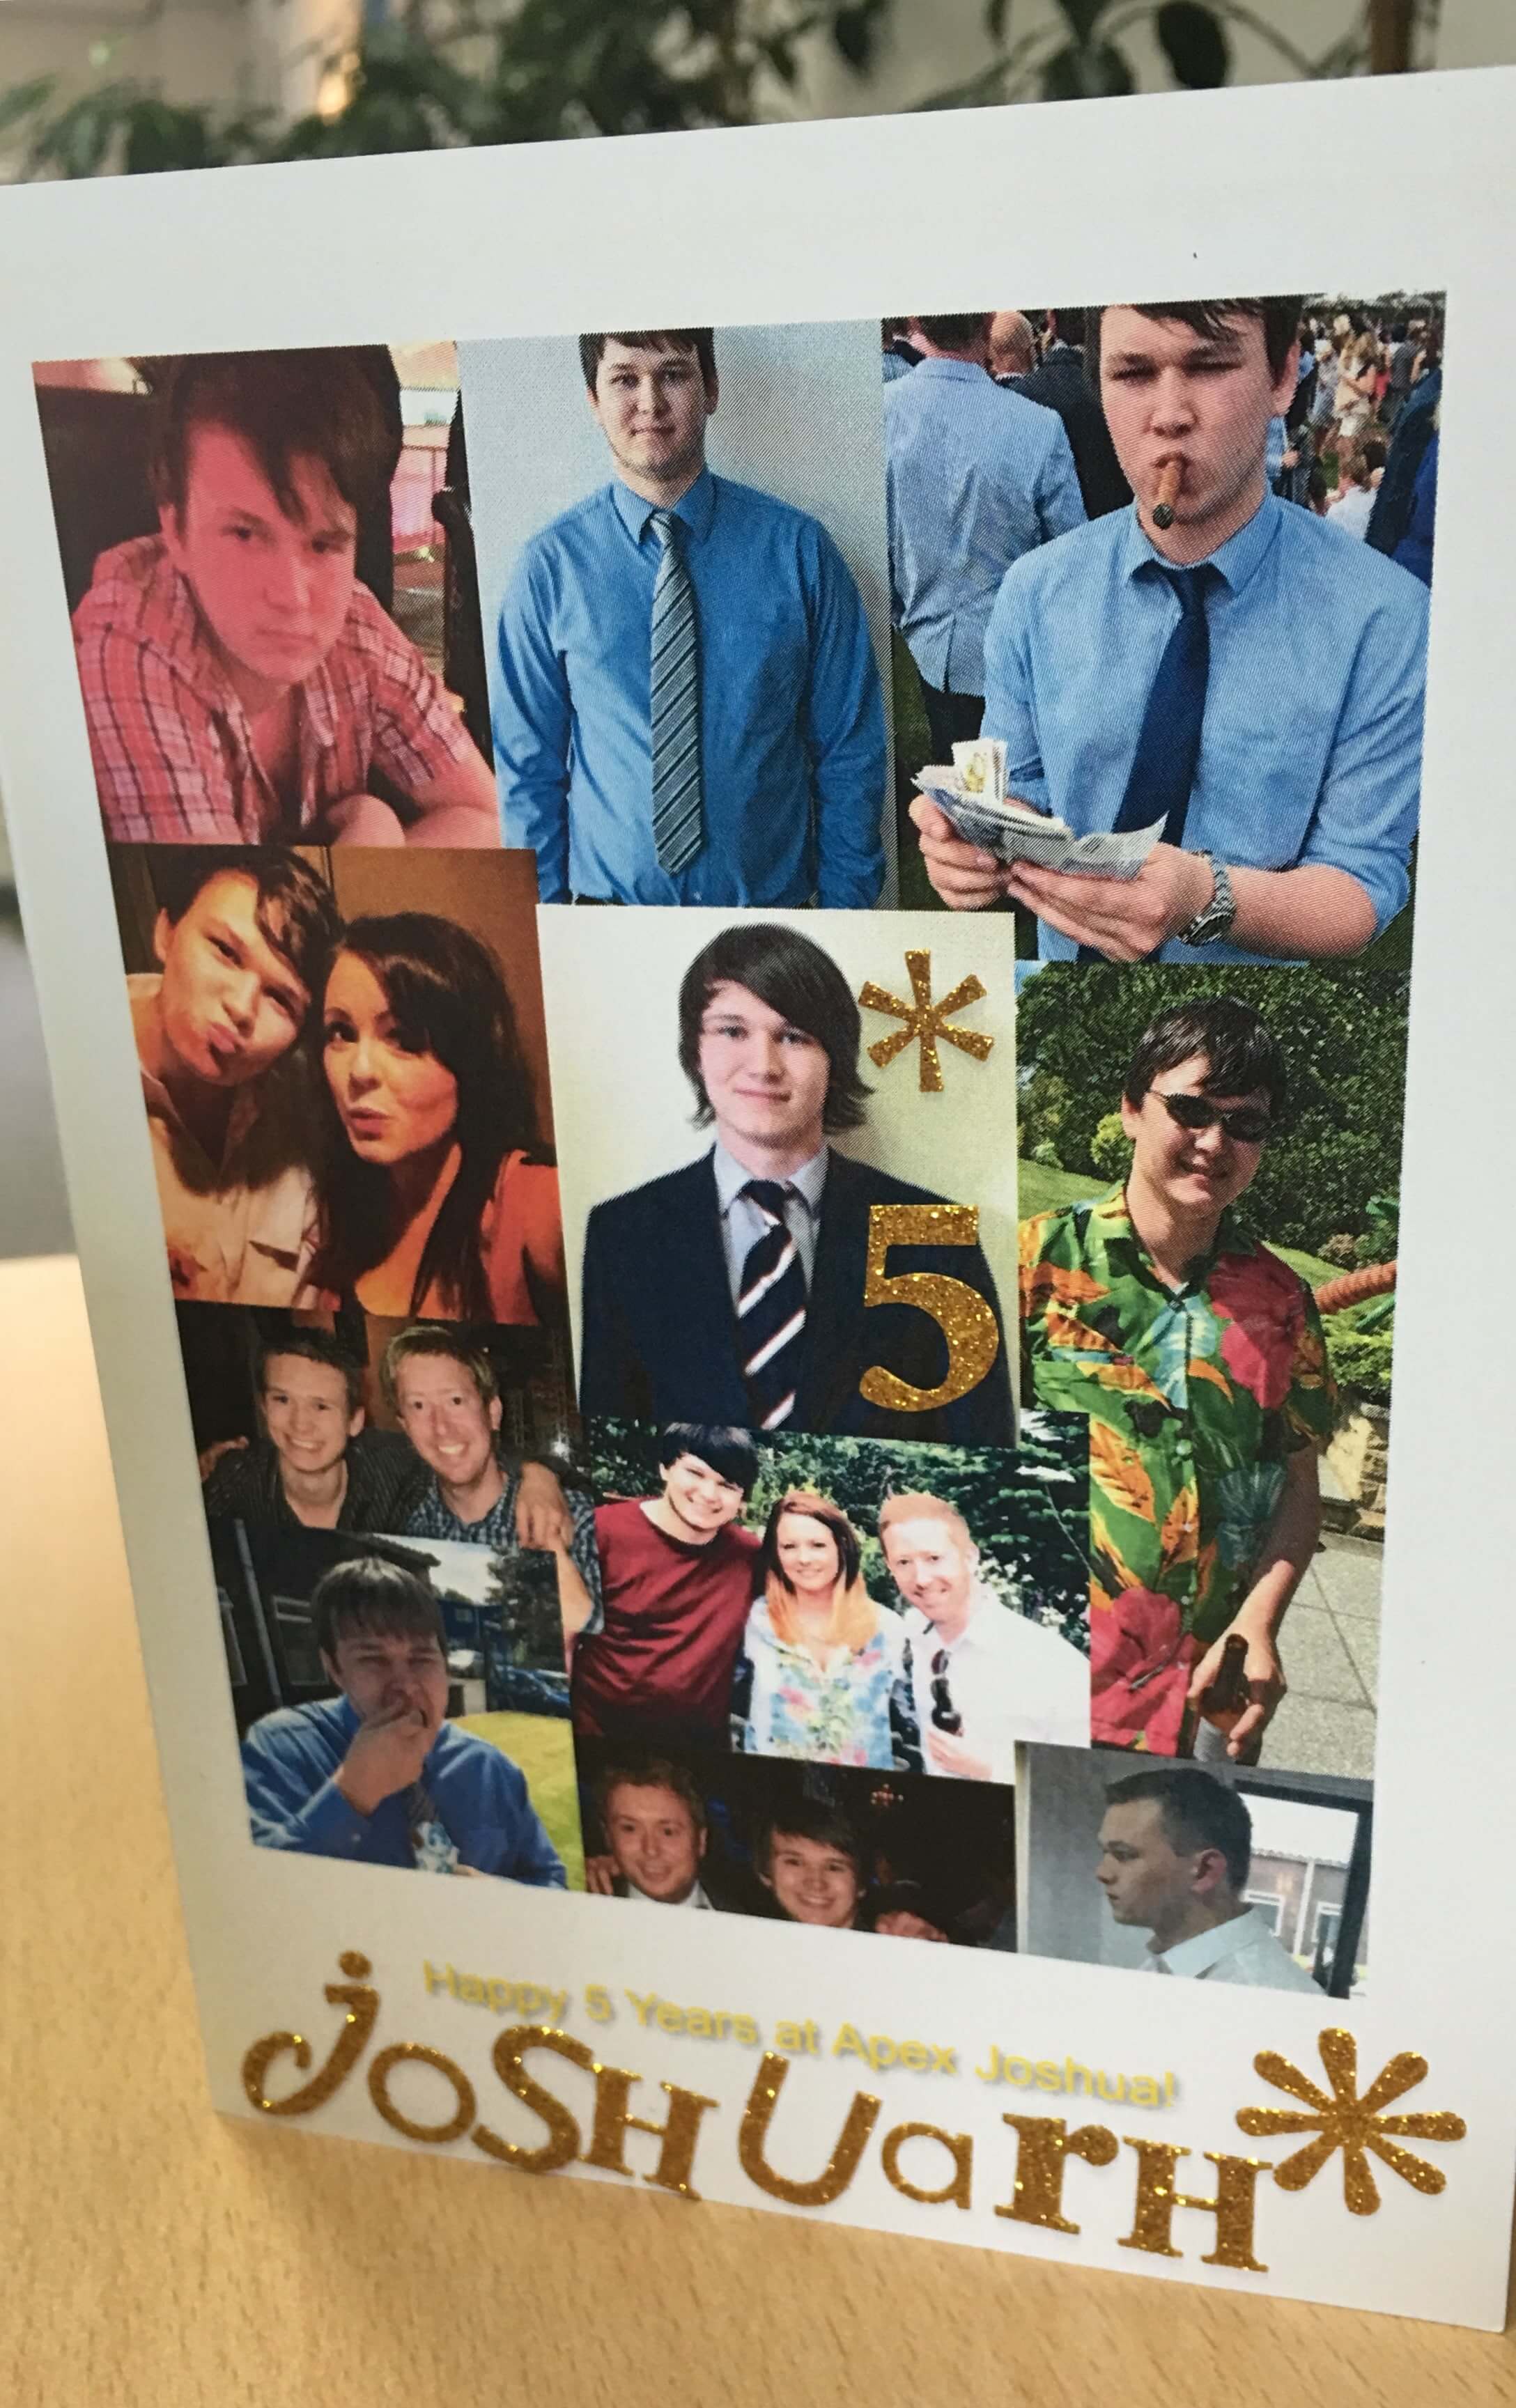 Happy 5 Year Anniversary to our Support Engineer, Josh Cookson!